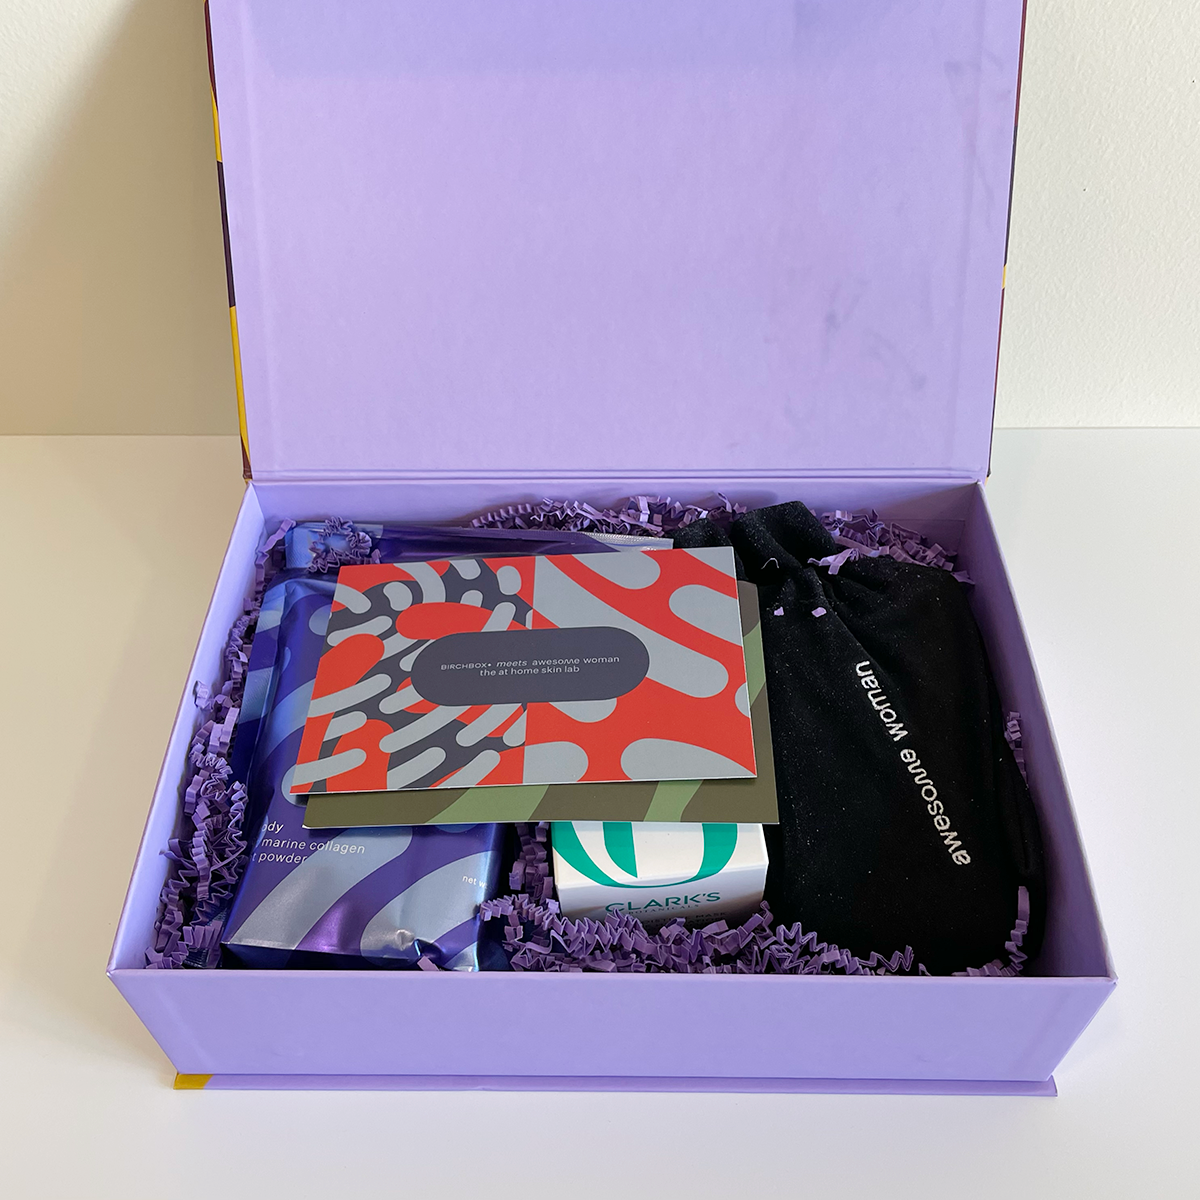 Lilac box with the lid lifted to reveal inside contents